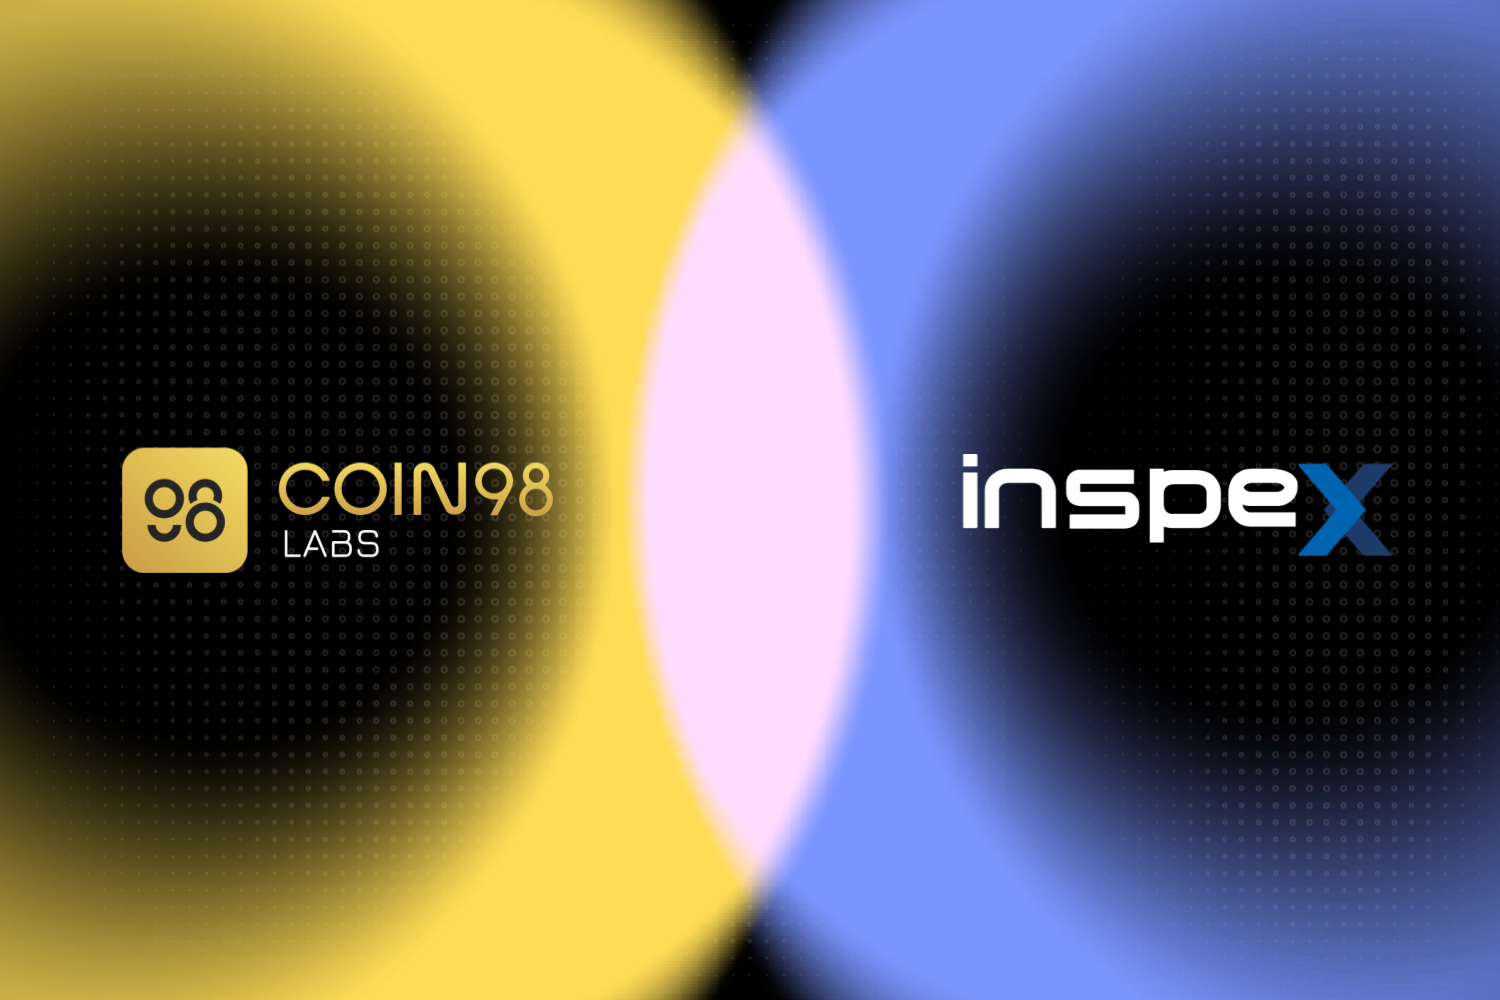 Coin98 Labs teams up with Inspex to maximize the security of the entire ecosystem